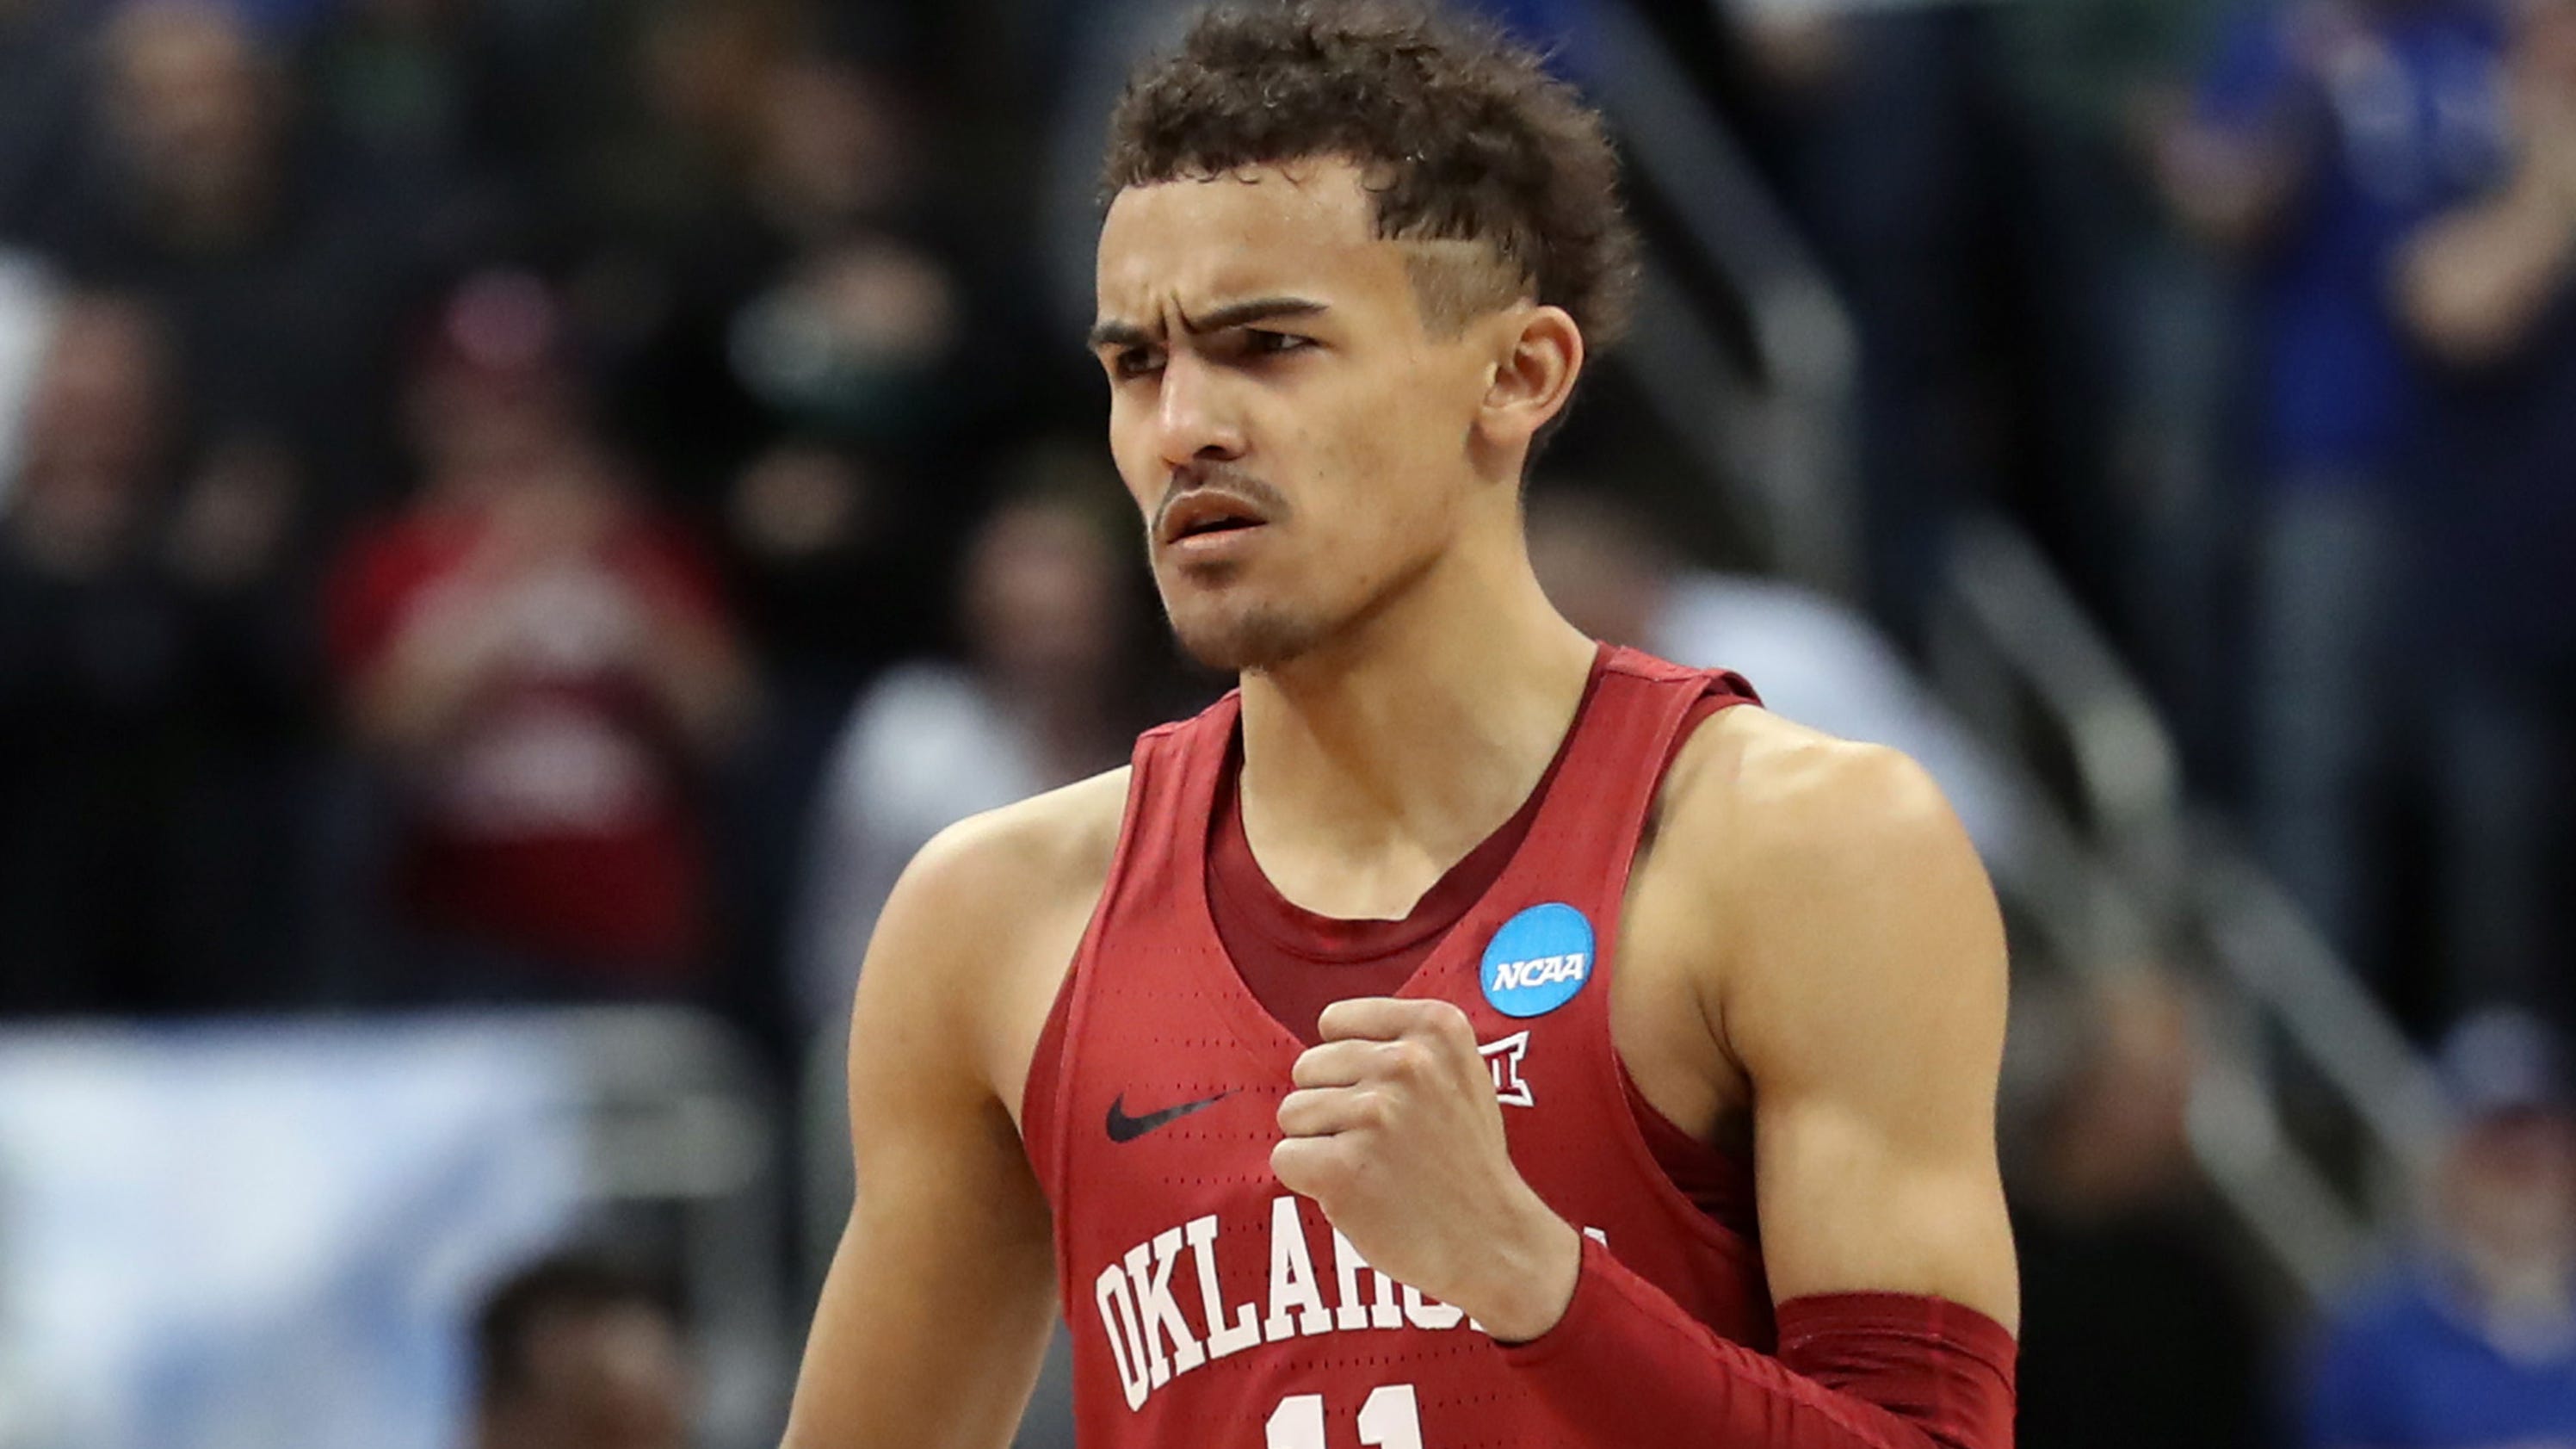 Trae Young says he's 'just getting started' after freshman season ends